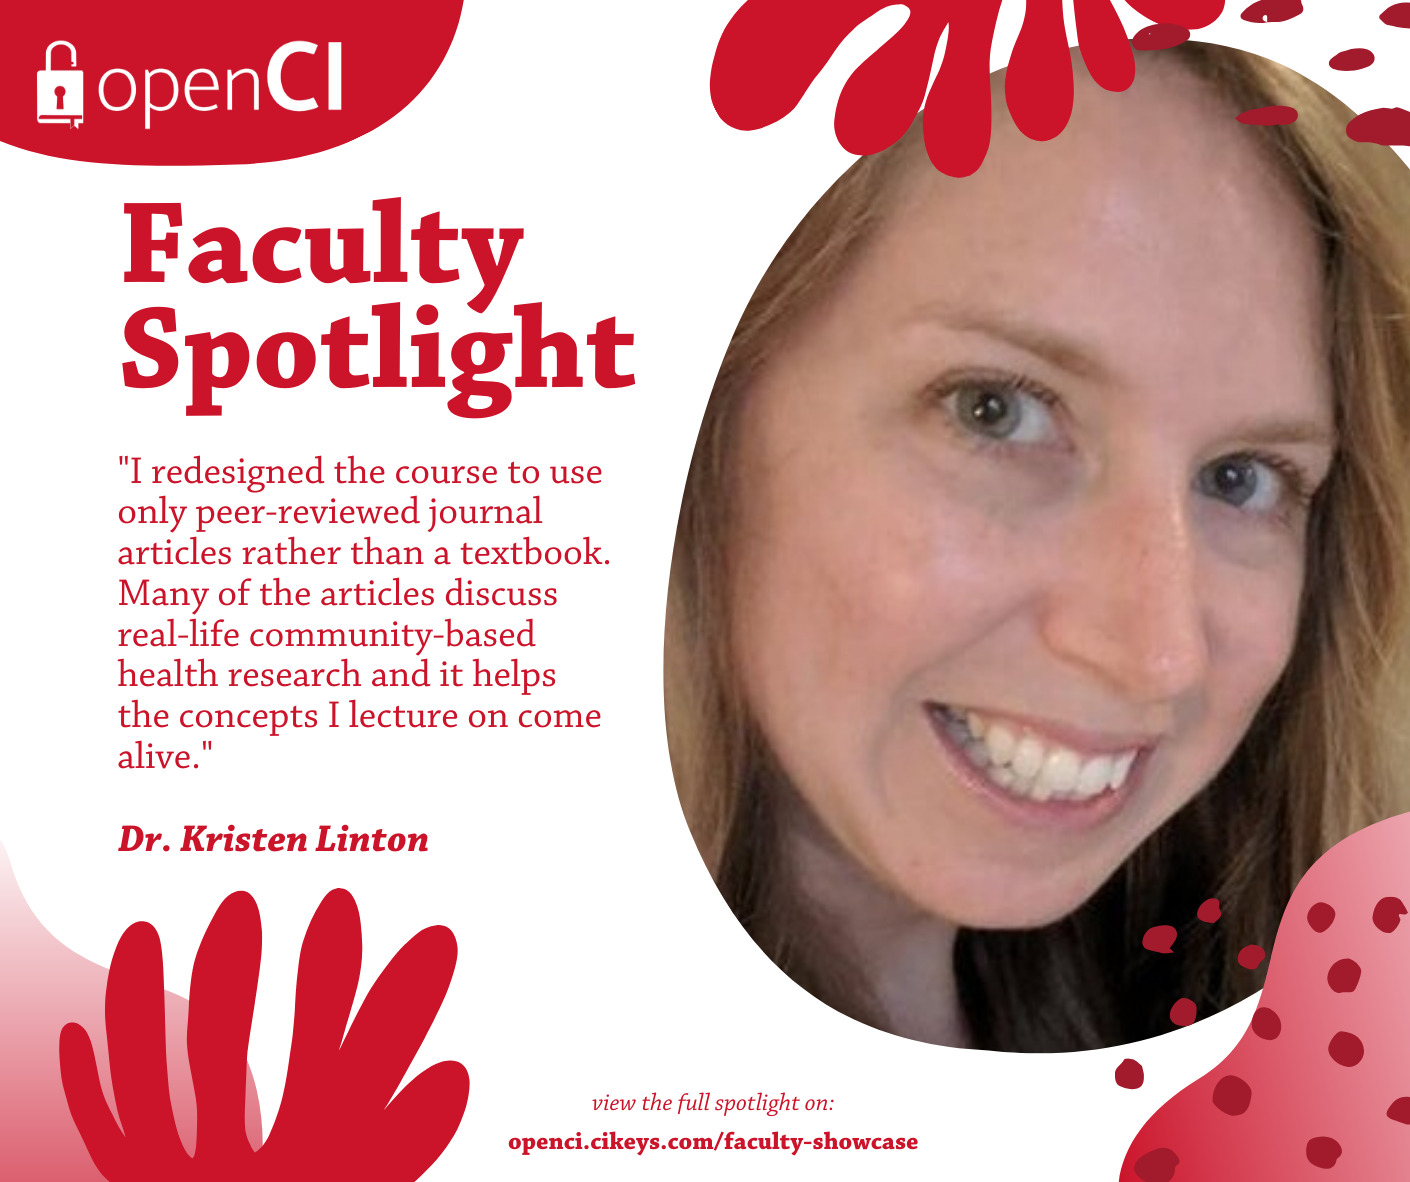 Dr. Linton Faculty Spotlight "I redesigned the course to use only peer-reviewed journal articles rather than a textbook. Many of the articles discuss real-life community-based health research and it helps the concepts I lecture on come alive."